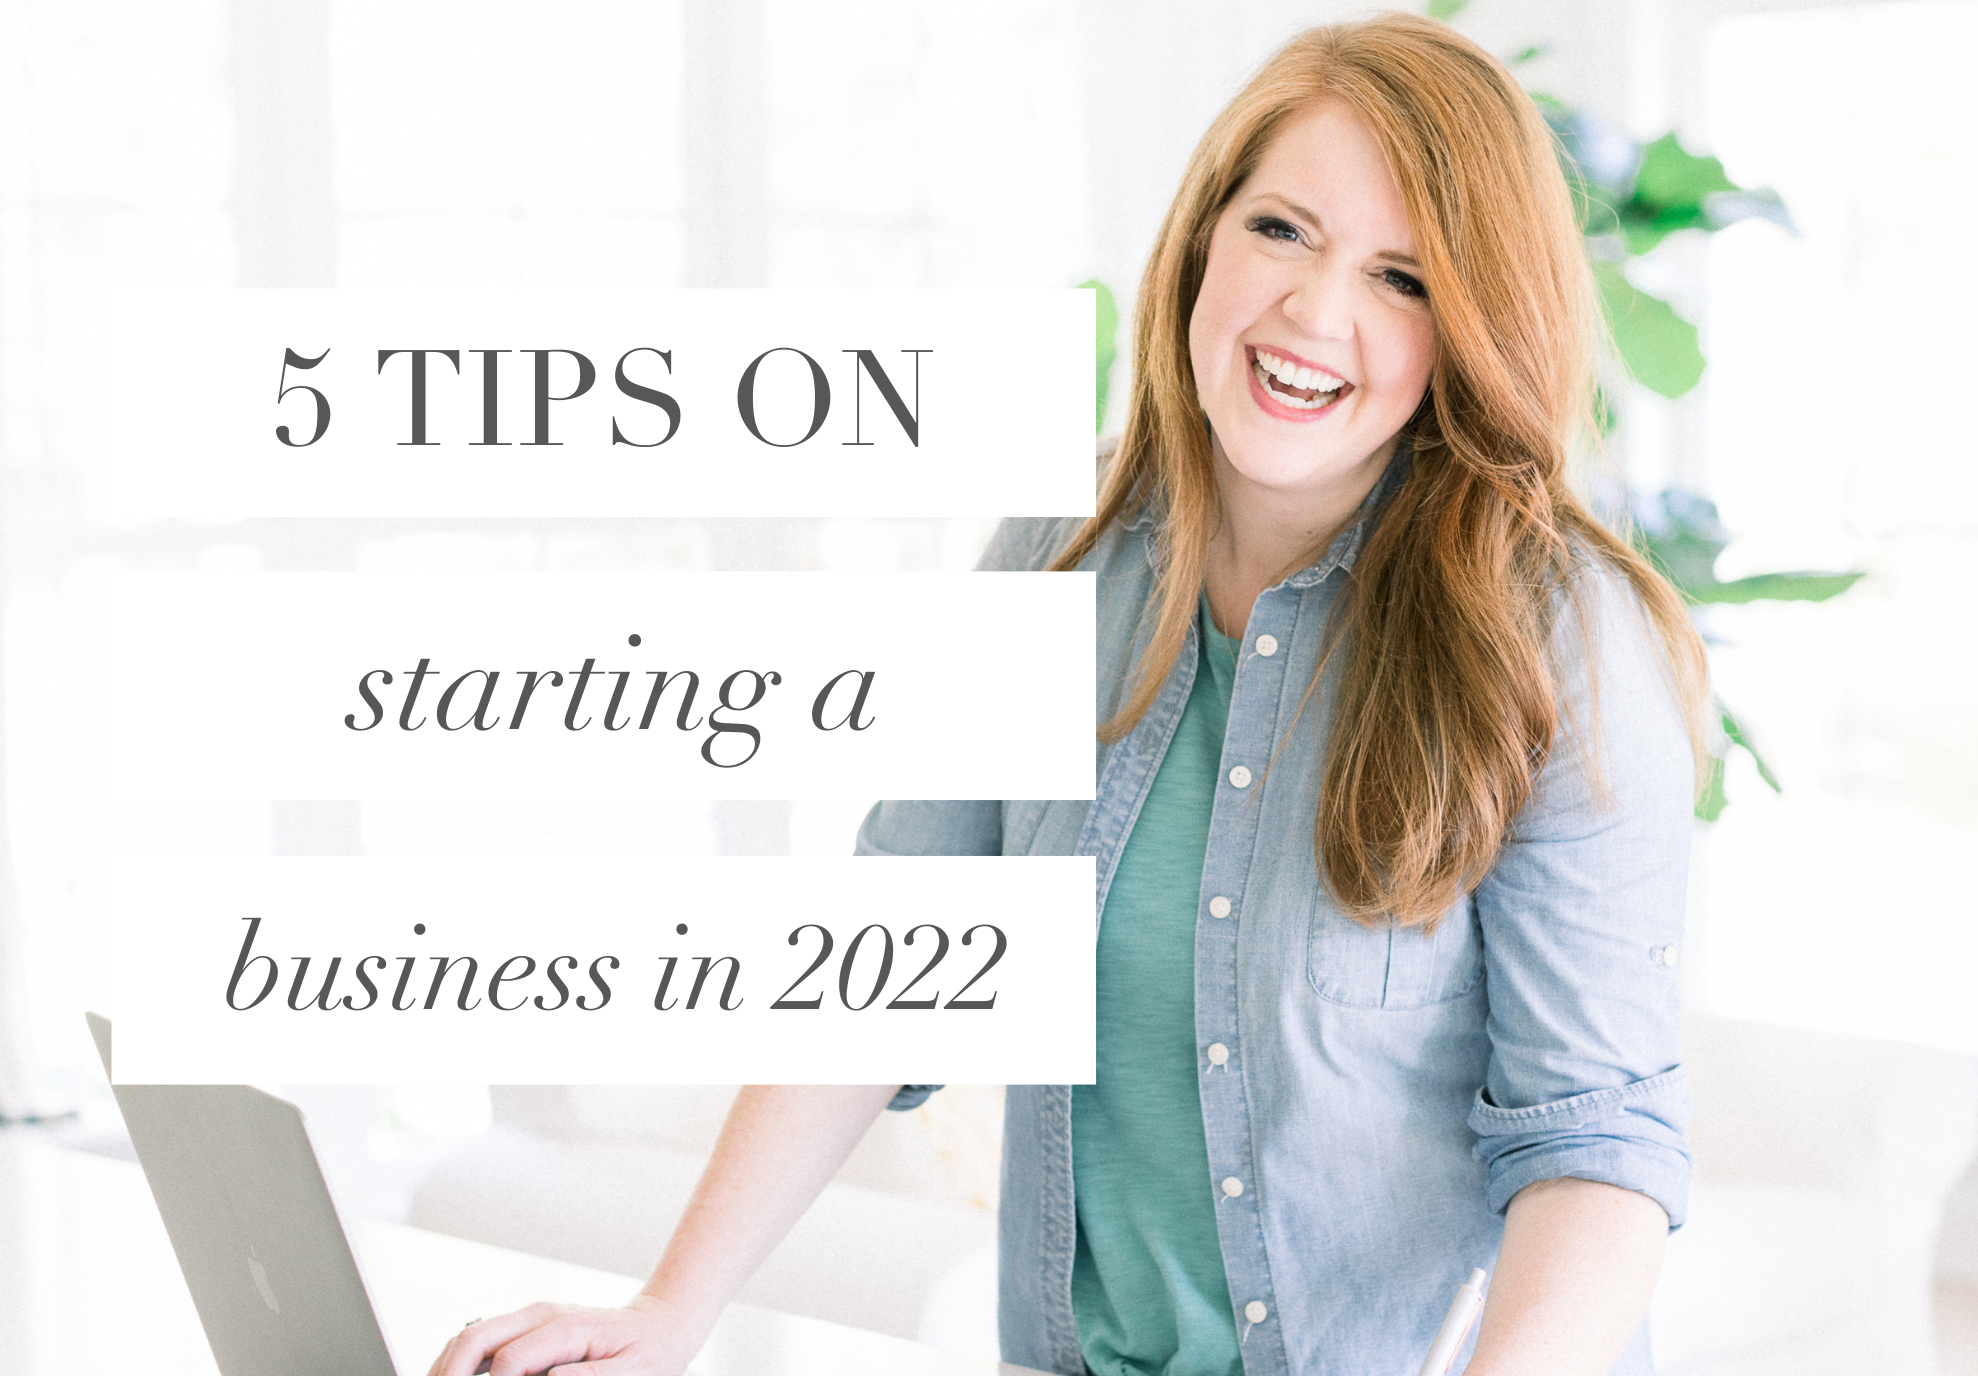 5 Tips on Starting a Business in 2022